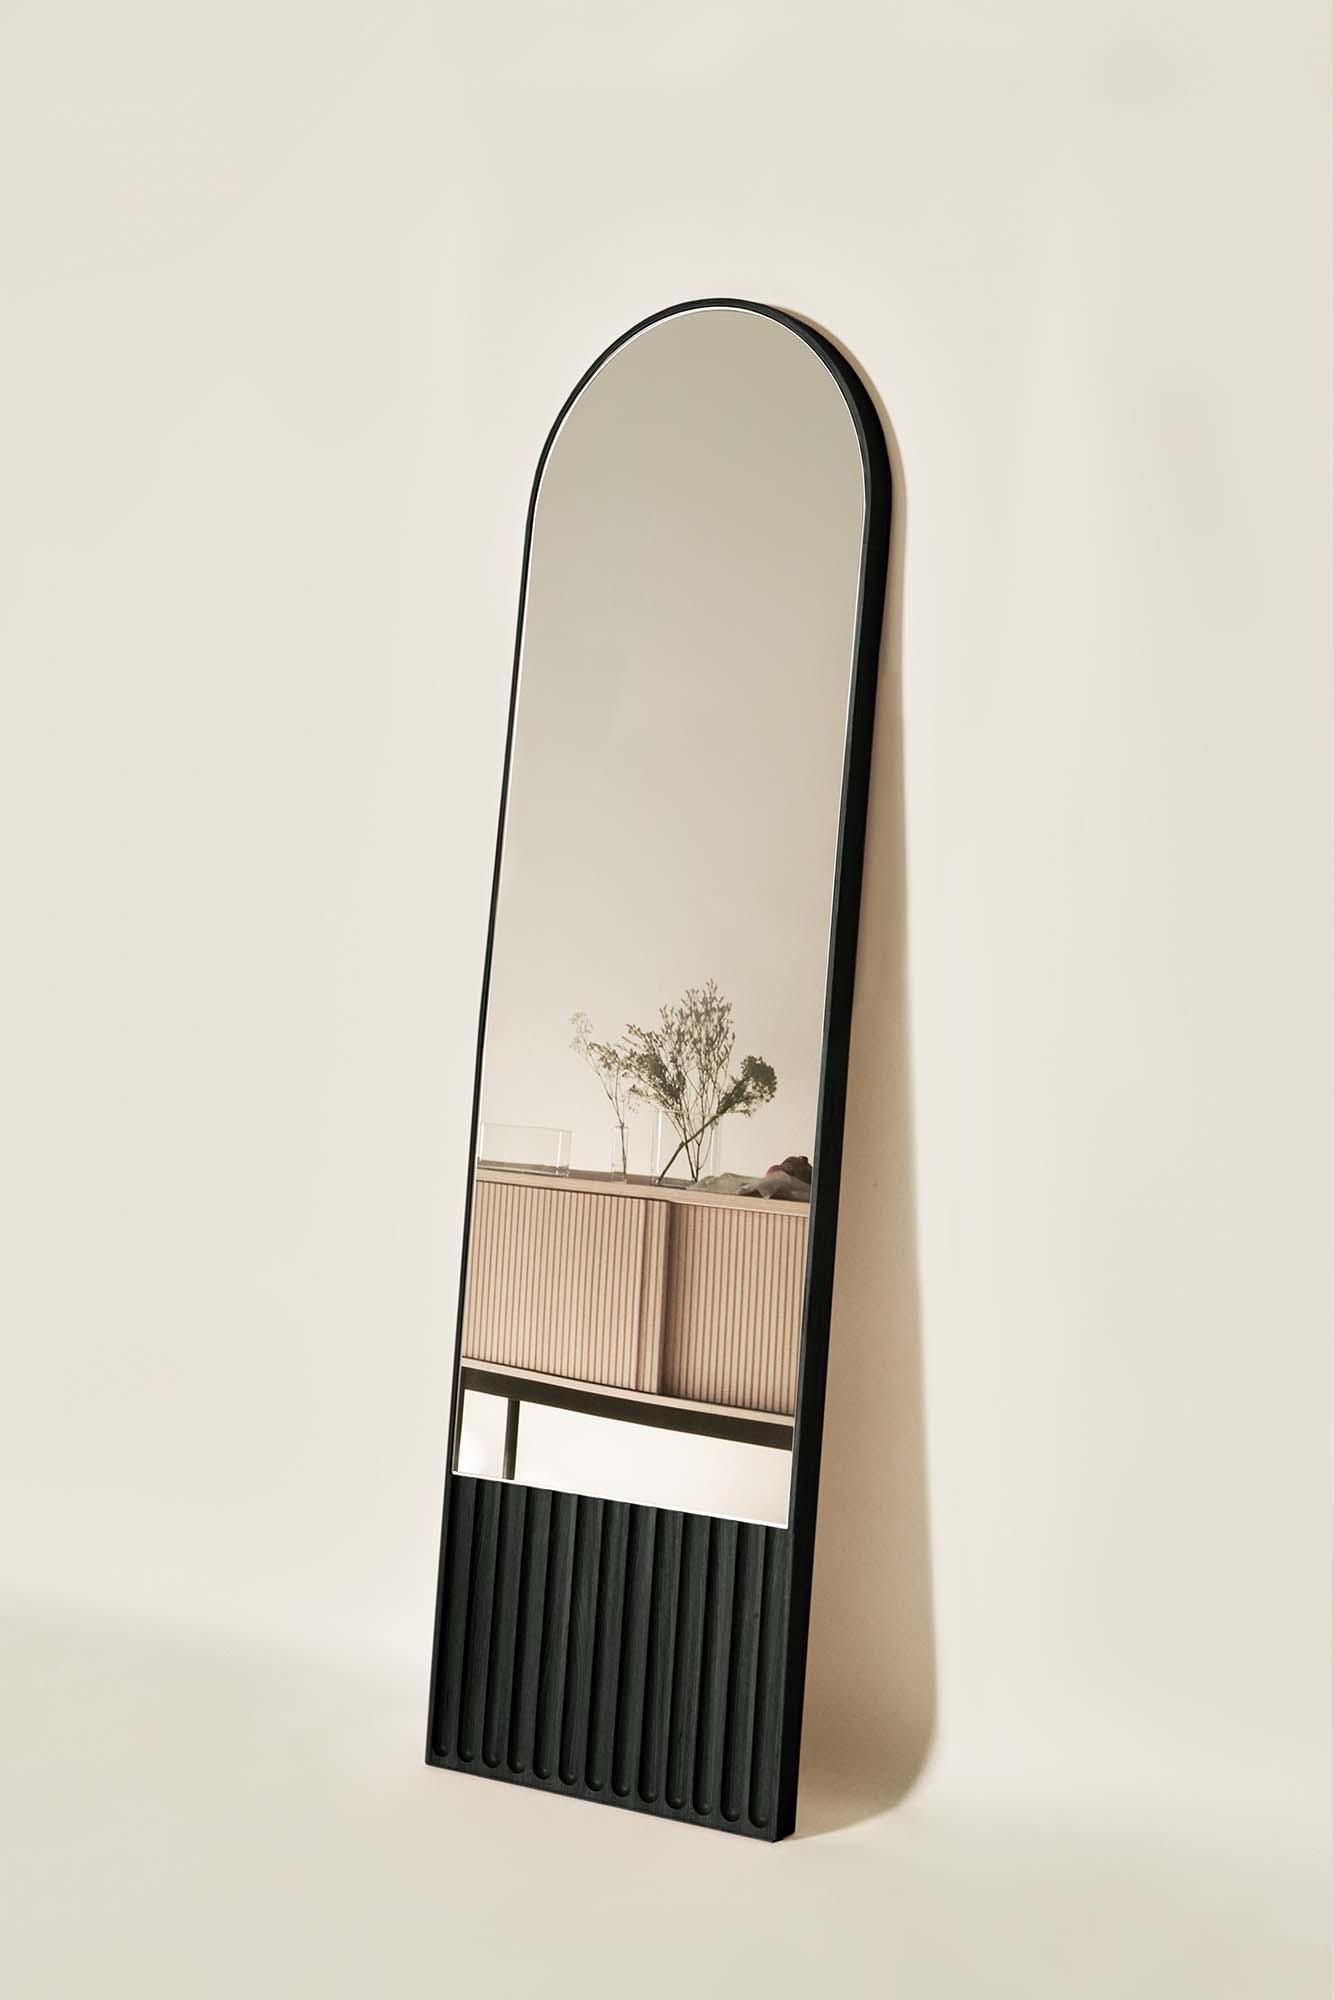 Tutto Sesto mirrors are part of the 2023 collection of contemporary solid wood furniture. Born from the dialogue between Dale Italia and Cono Studio, the range is defined by essential aesthetics, in tune with current trends without losing touch with